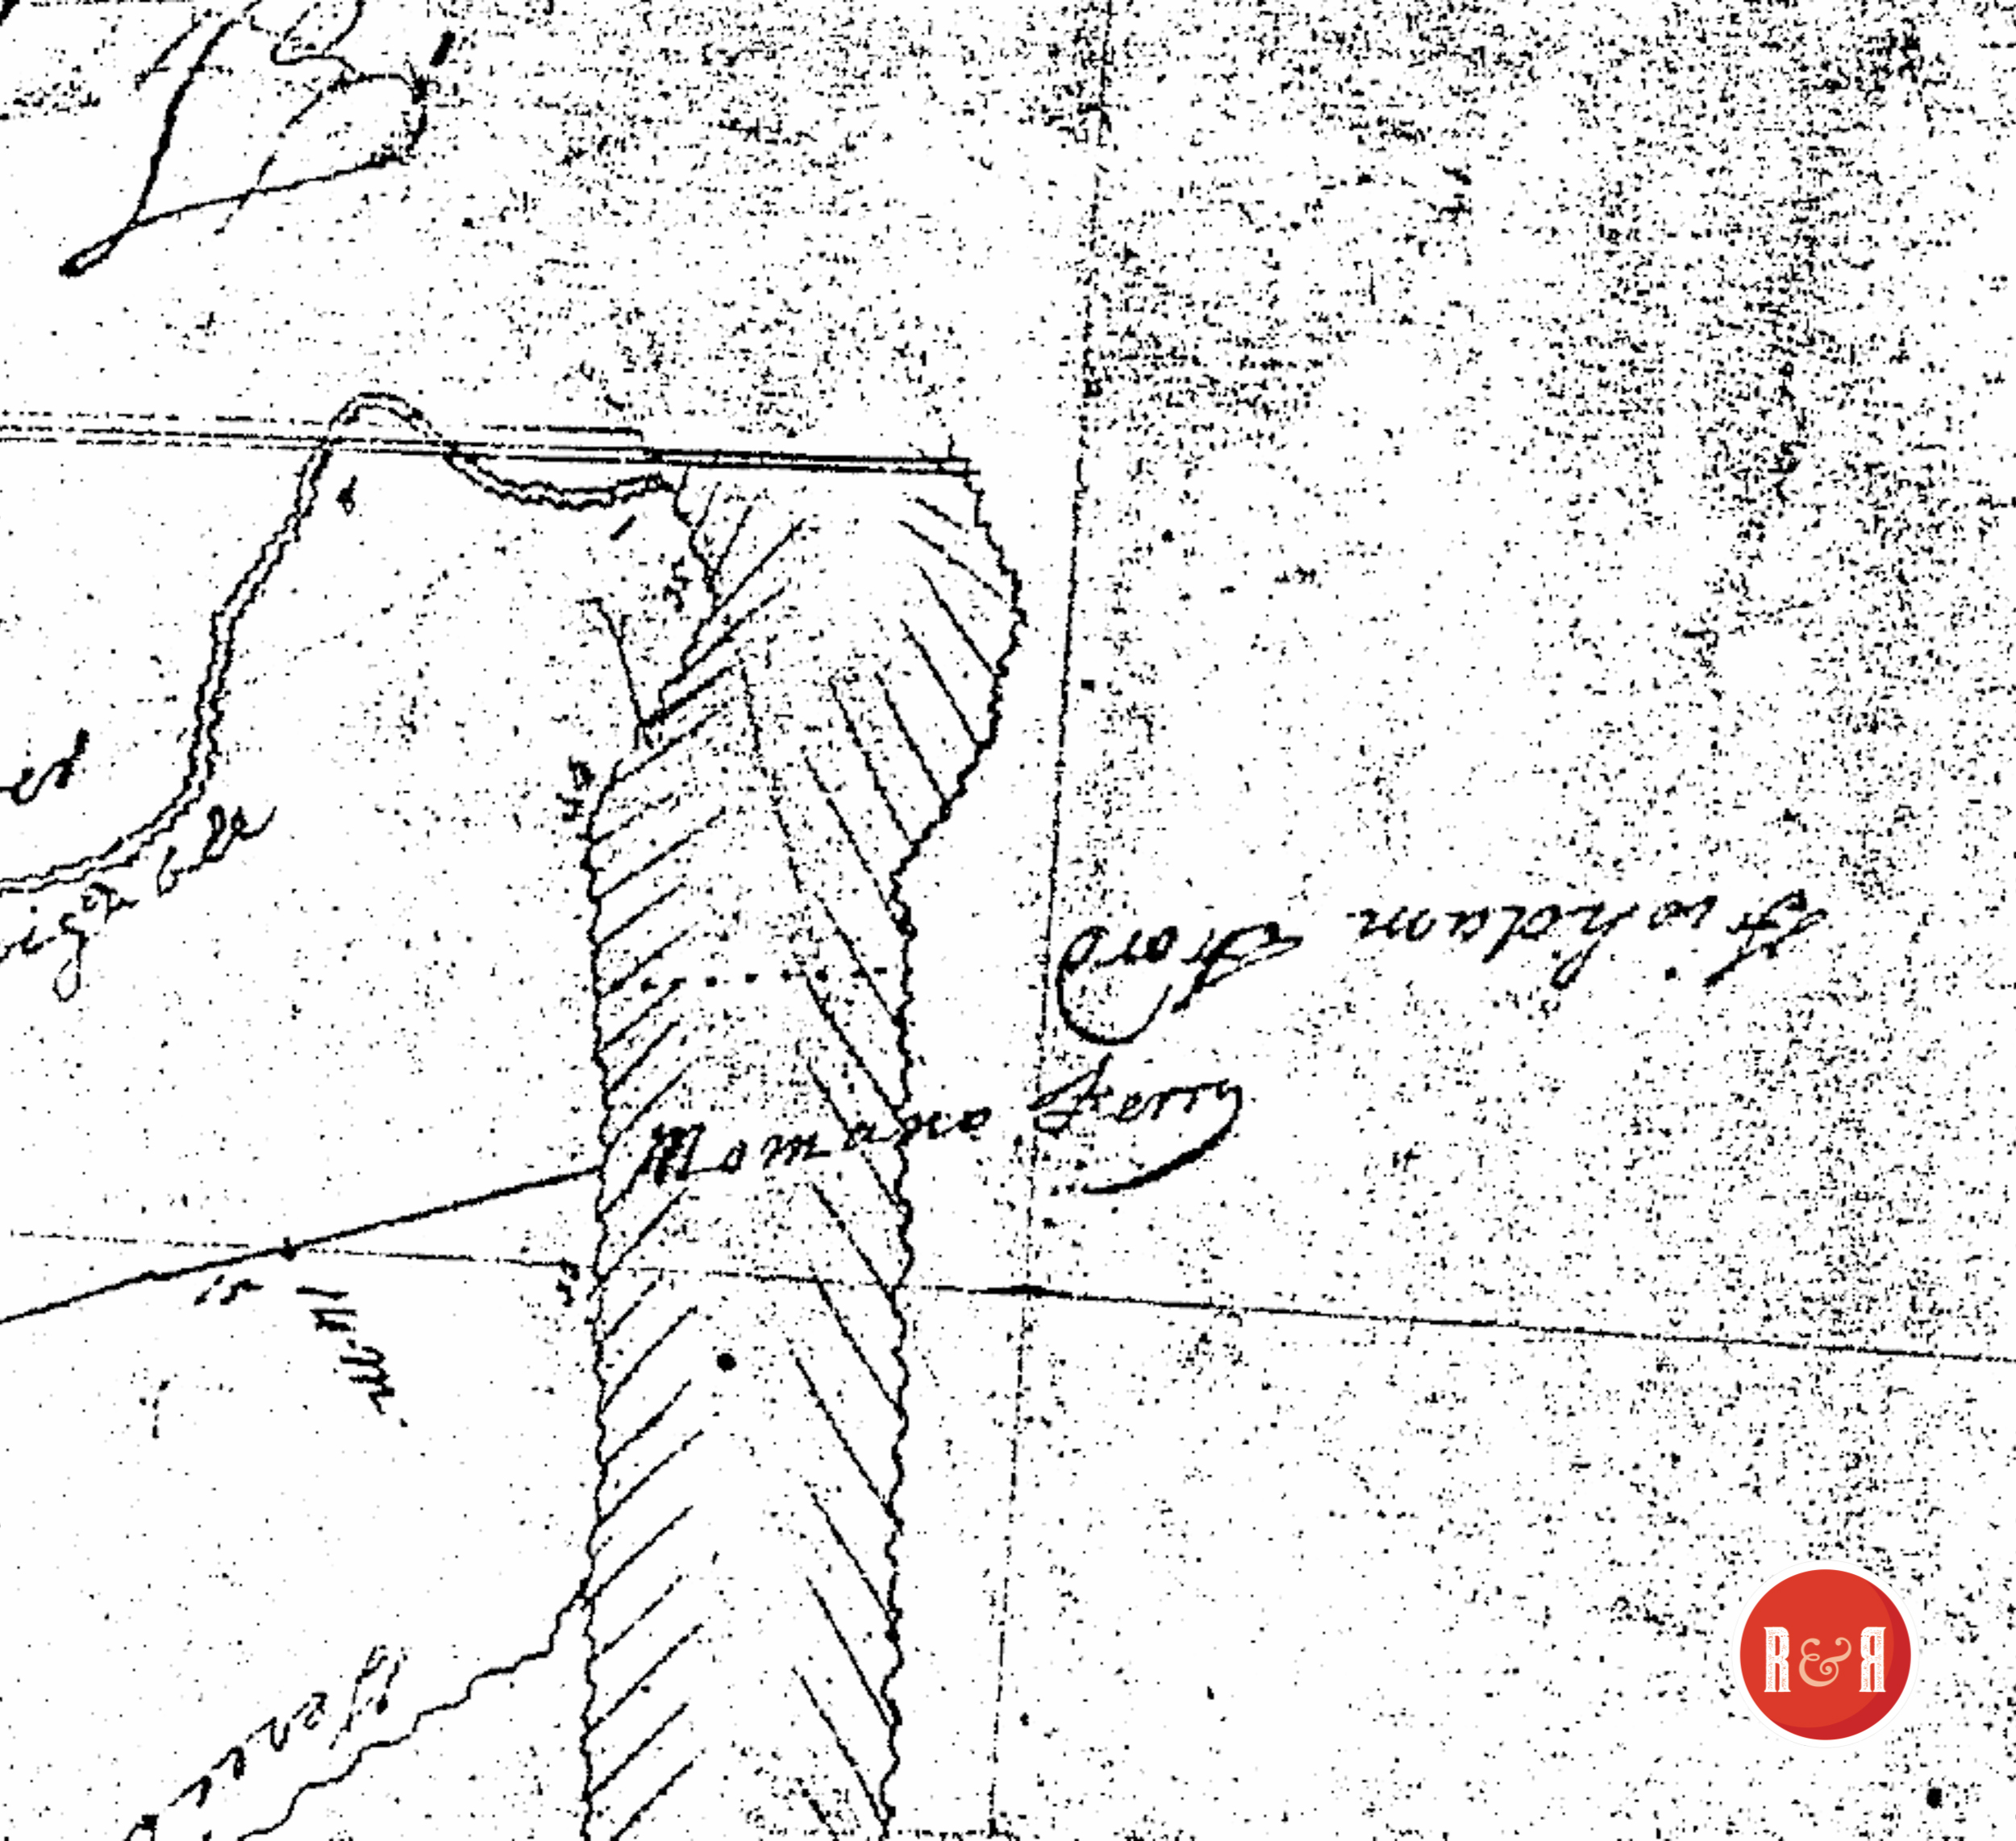 MOMAN'S FERRY ALSO SHOWS ON THE BOYD SURVEY - 1818